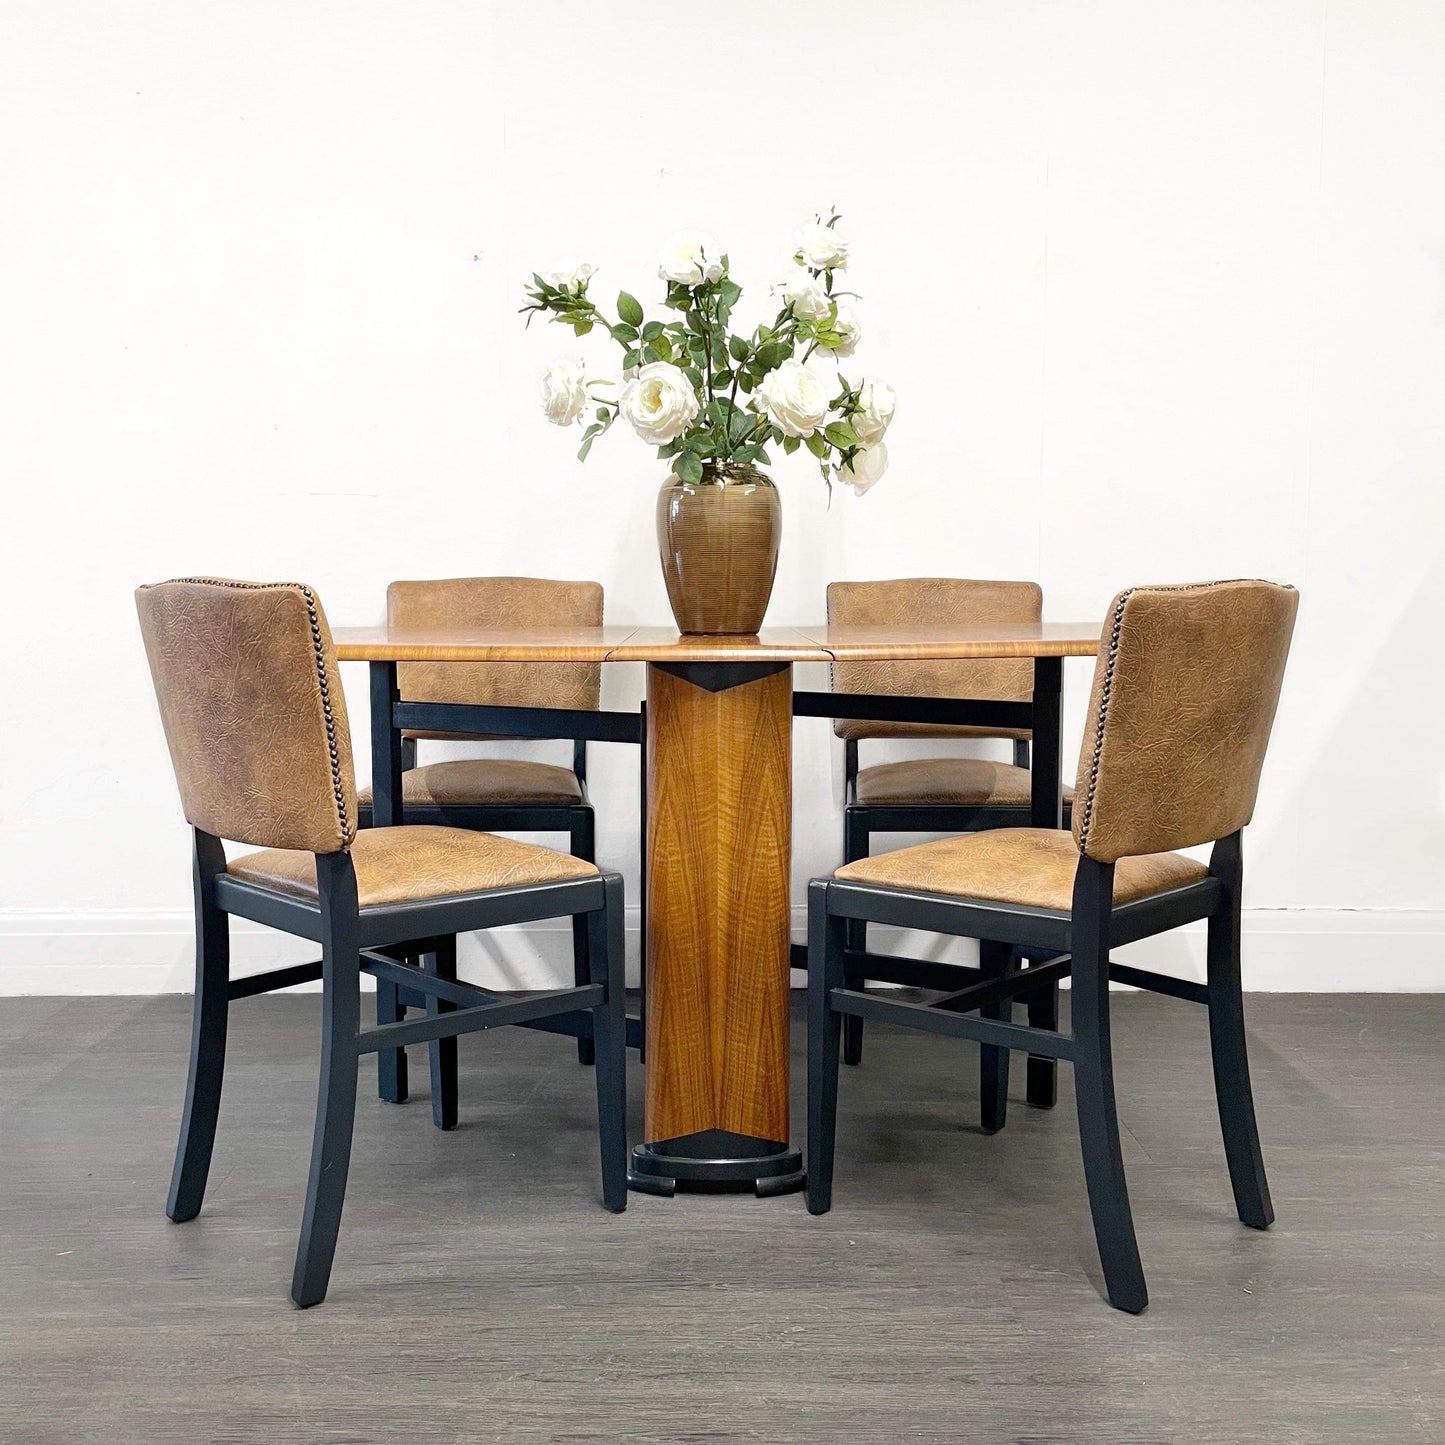 Set of 4 Beautility Black Painted Dining Chairs With Honey Faux Leather Seating.